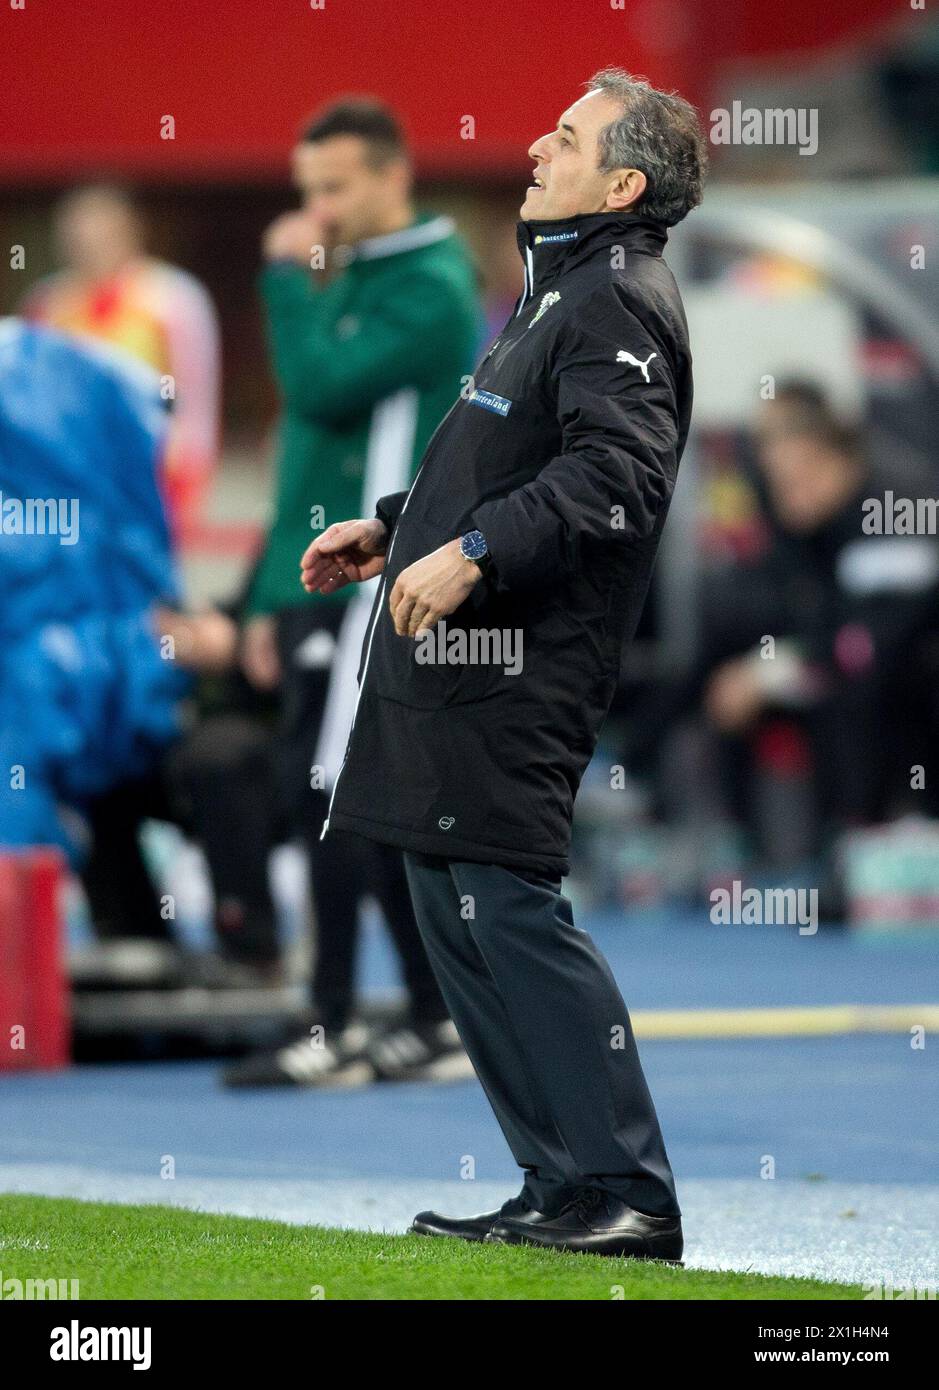 International Friendly Football Match between Austria and Albania at the Ernst Happel Stadium, Vienna, Austria on 2016/03/26. In the picture: coach of Austria Marcel Koller - 20160326 PD2366 - Rechteinfo: Rights Managed (RM) Stock Photo